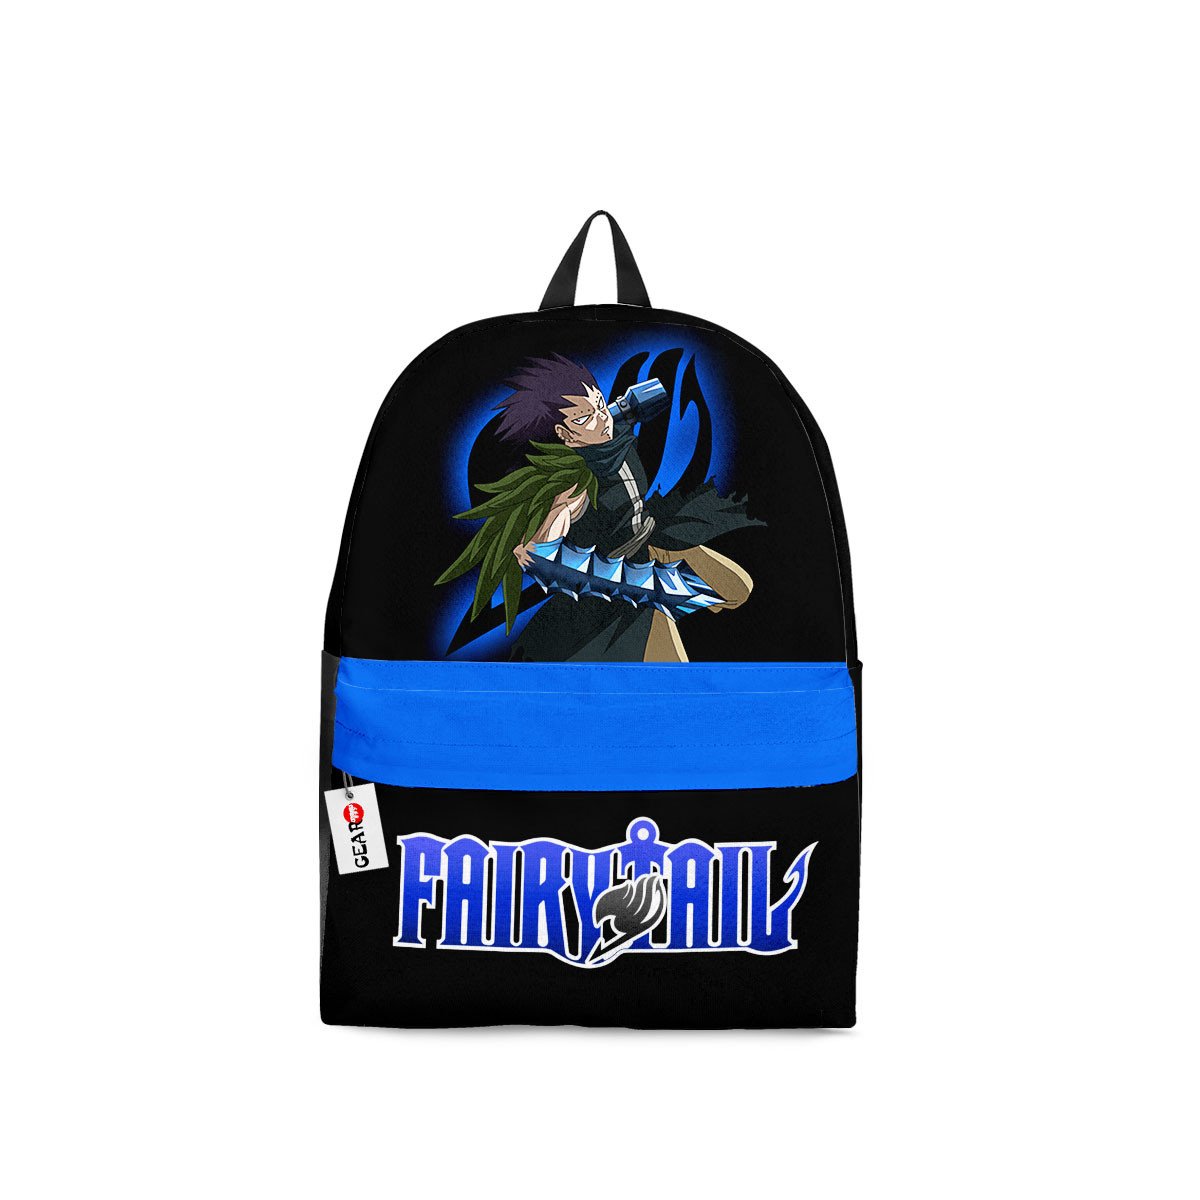 BEST Gajeel Redfox Fairy Tail Anime Printed 3D Leisure Backpack